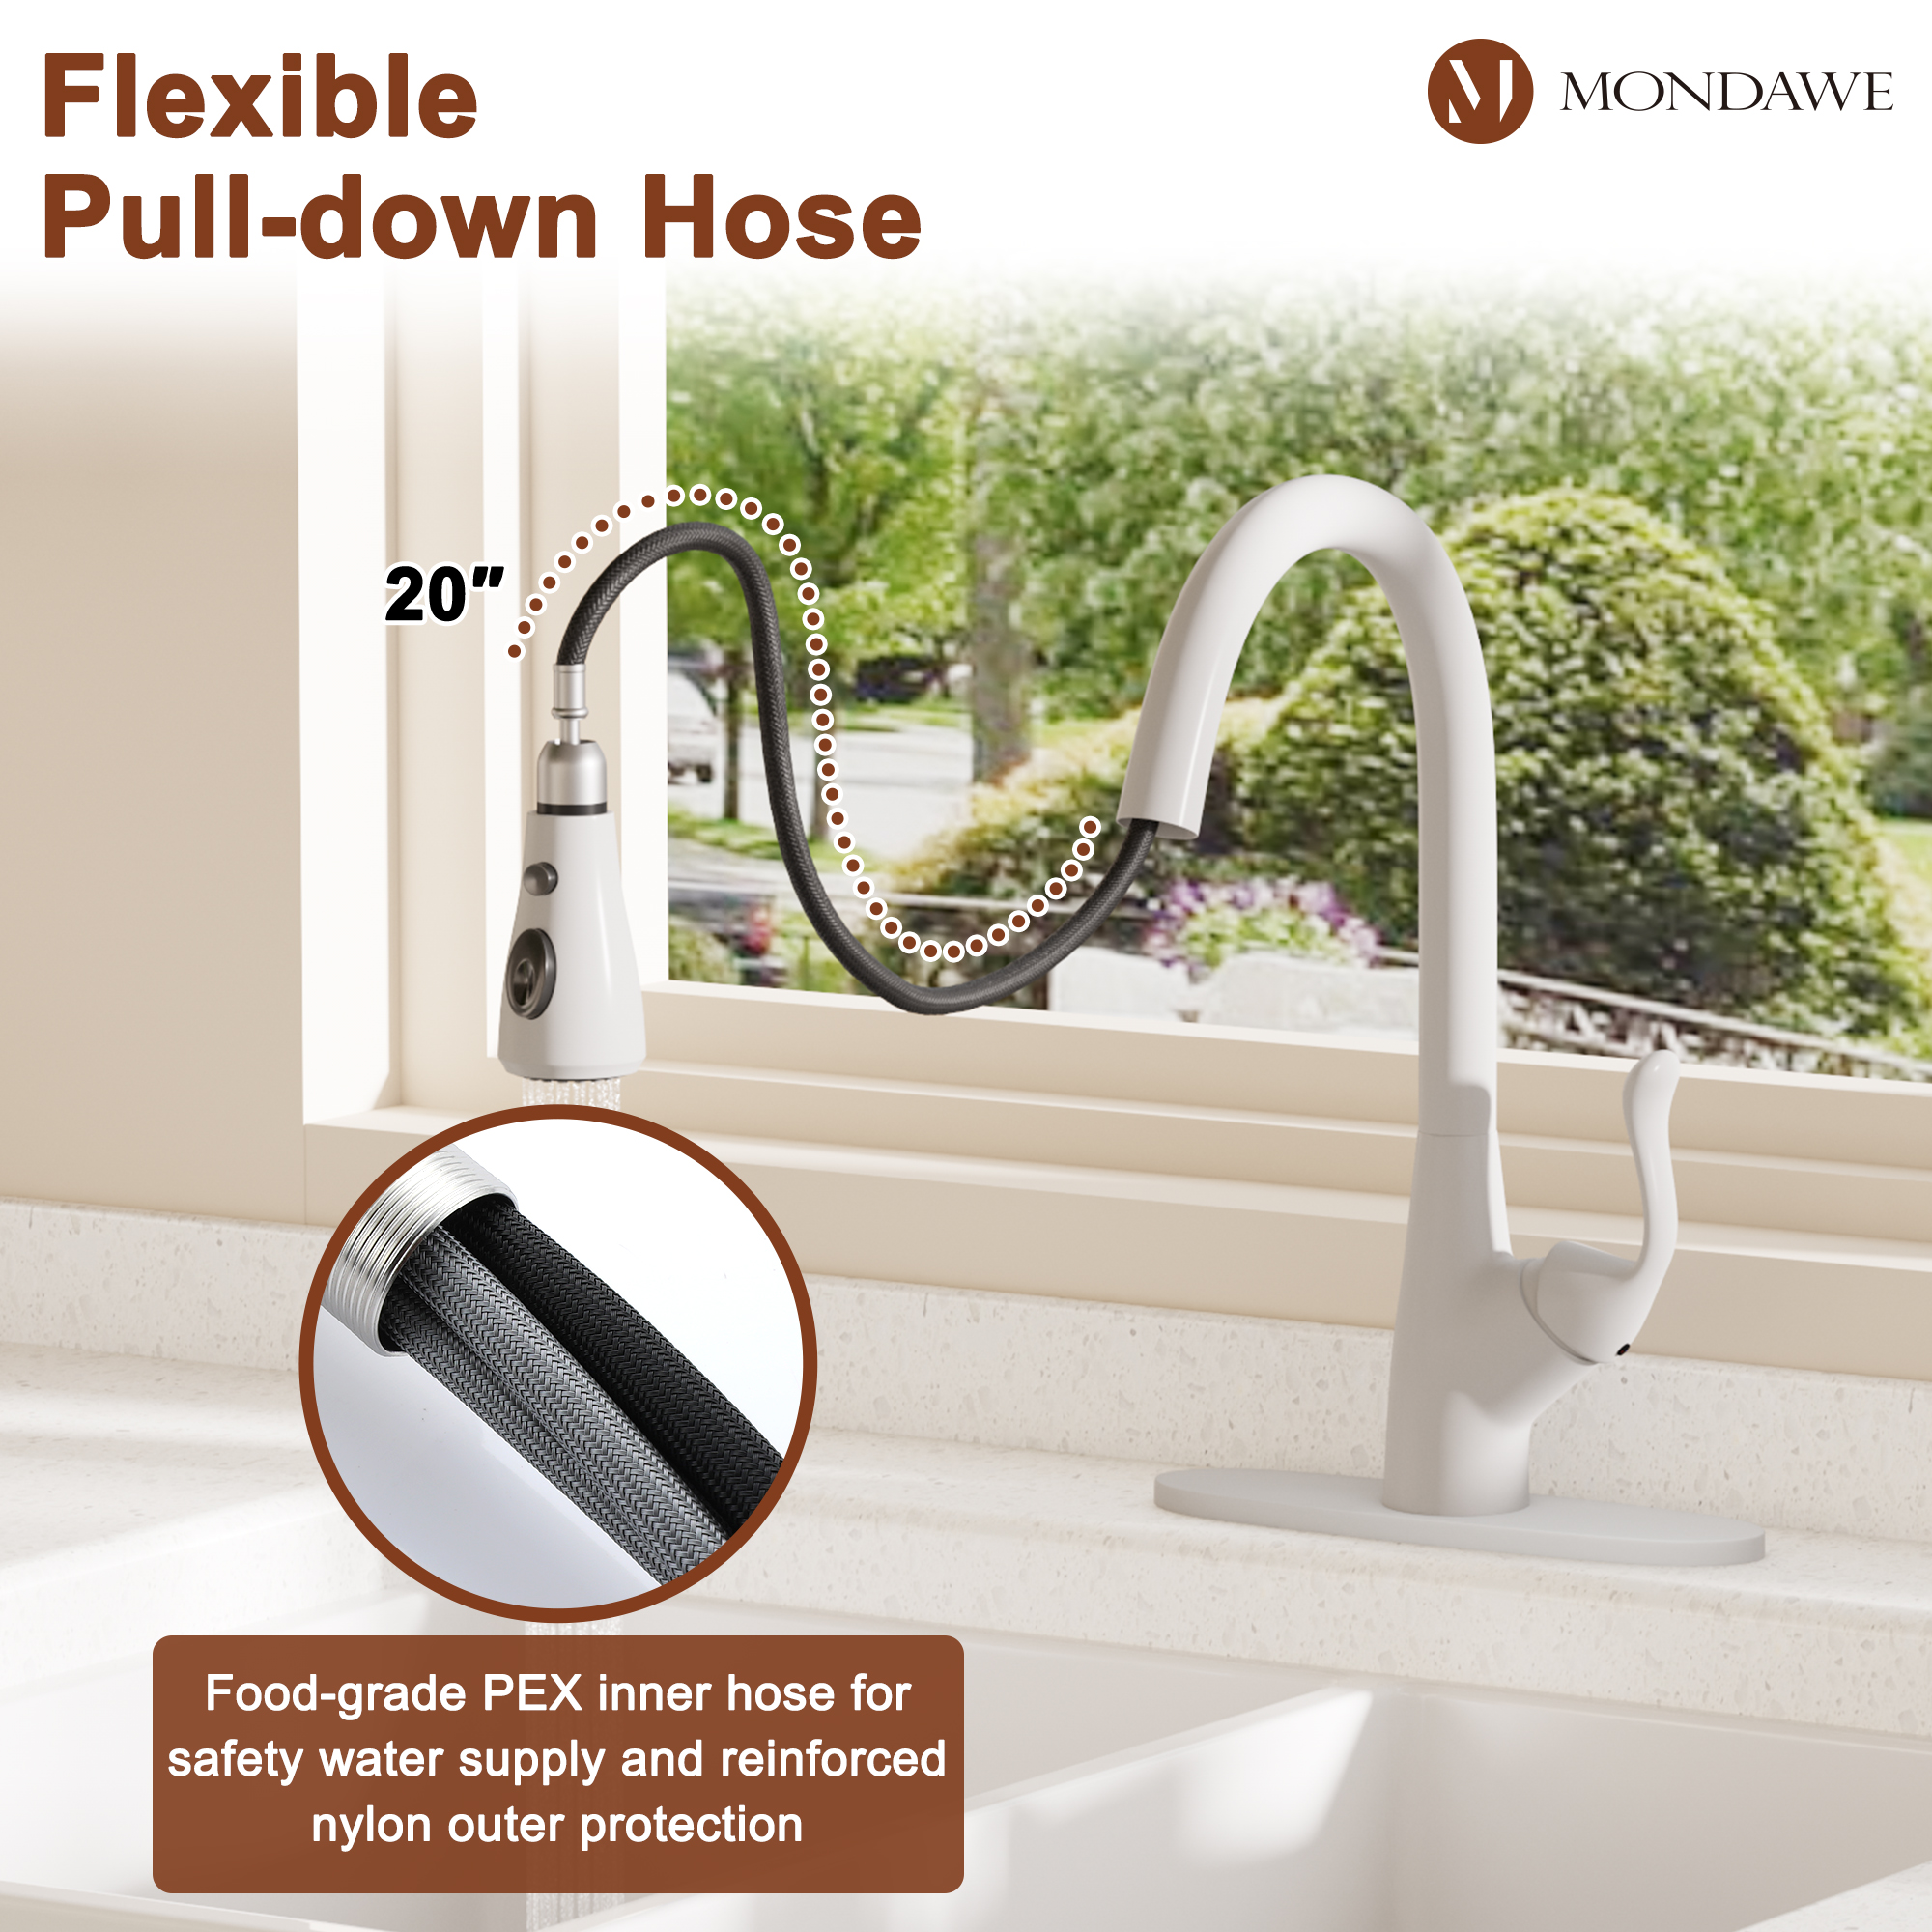 Mondawe Kitchen Faucet with Pull Down, 1.8 gpm Single Handle Kitchen Sink Faucet, Lead-Free Copper for Bar Laundry Kitchen Sink-Mondawe